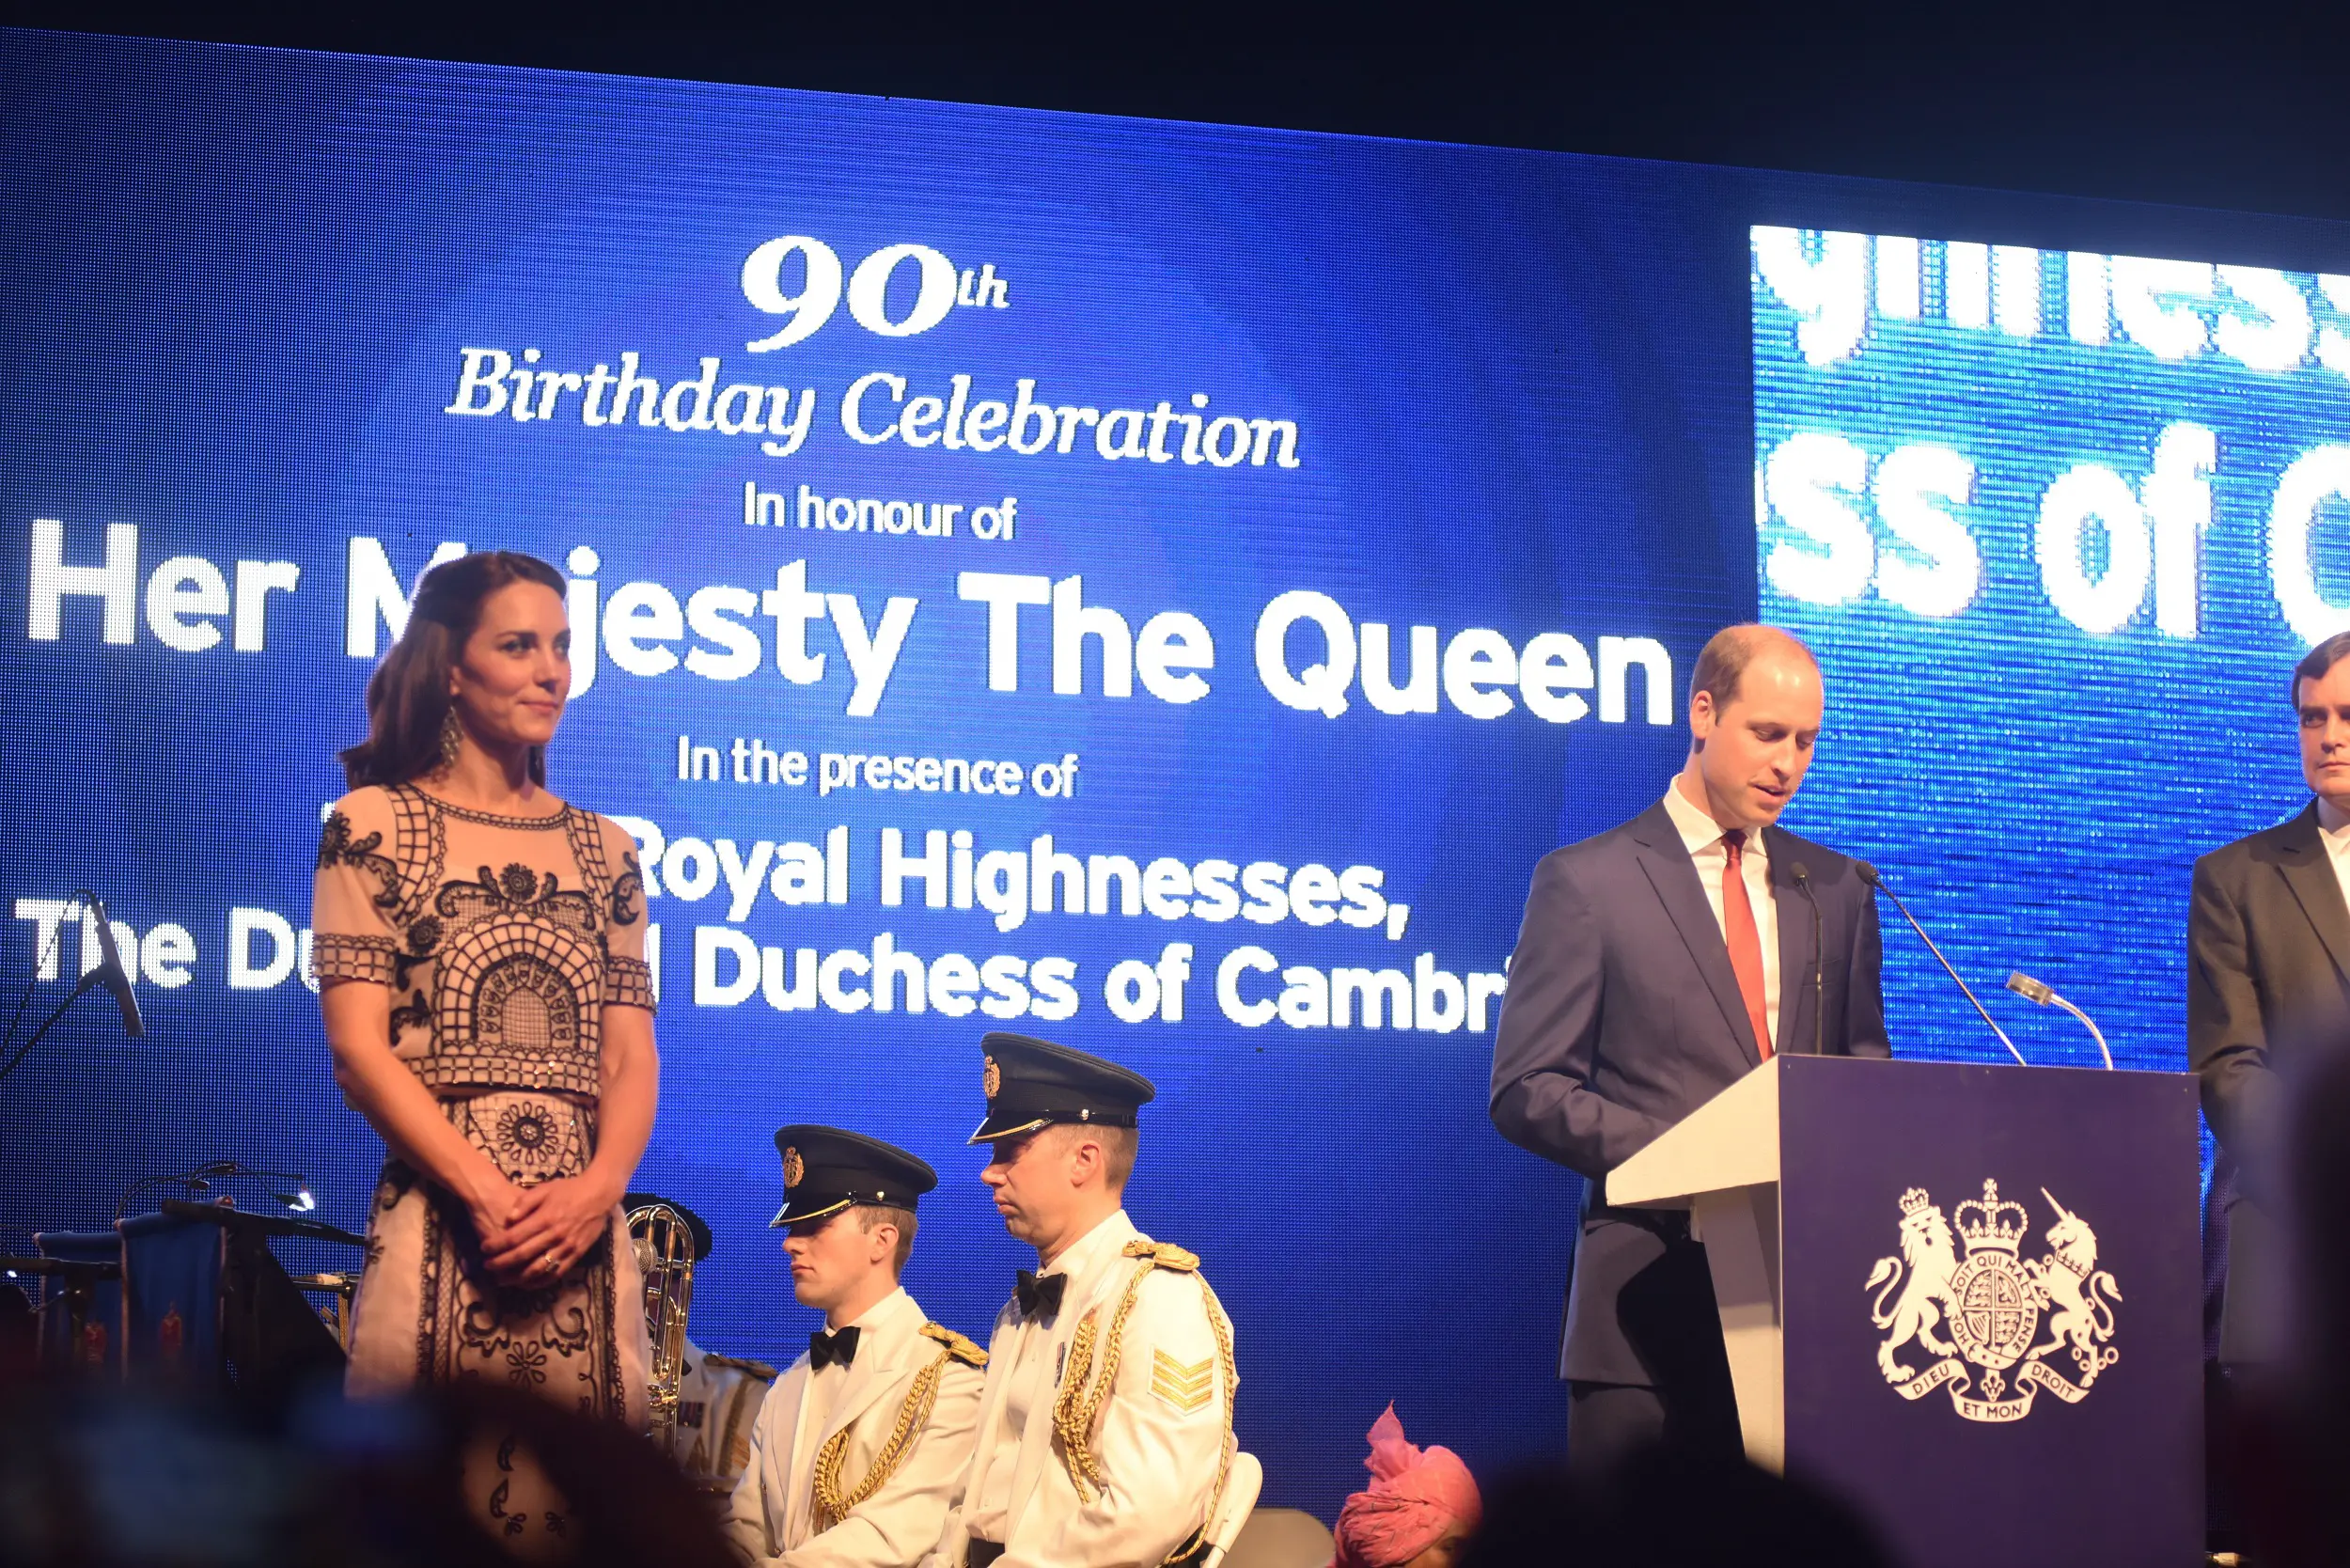 The Duke used the occasion to personally pay tribute to his grandmother with a speech to the invited guests.